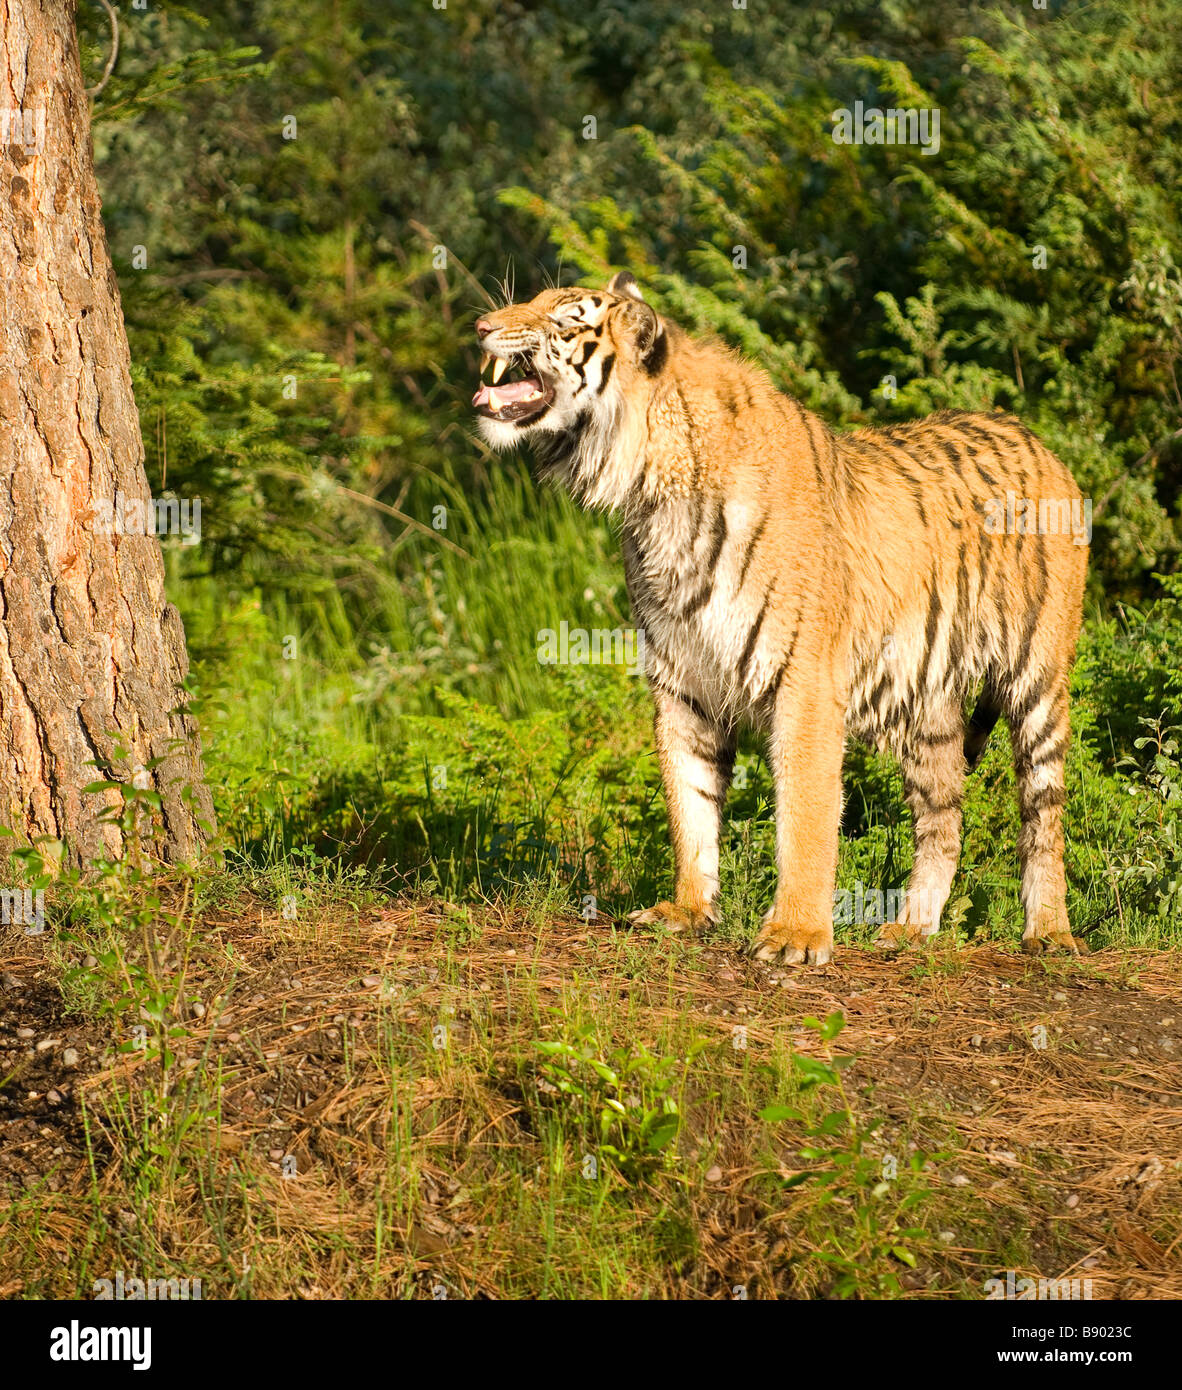 Tiger showing its teeth in a threatening growl Stock Photo